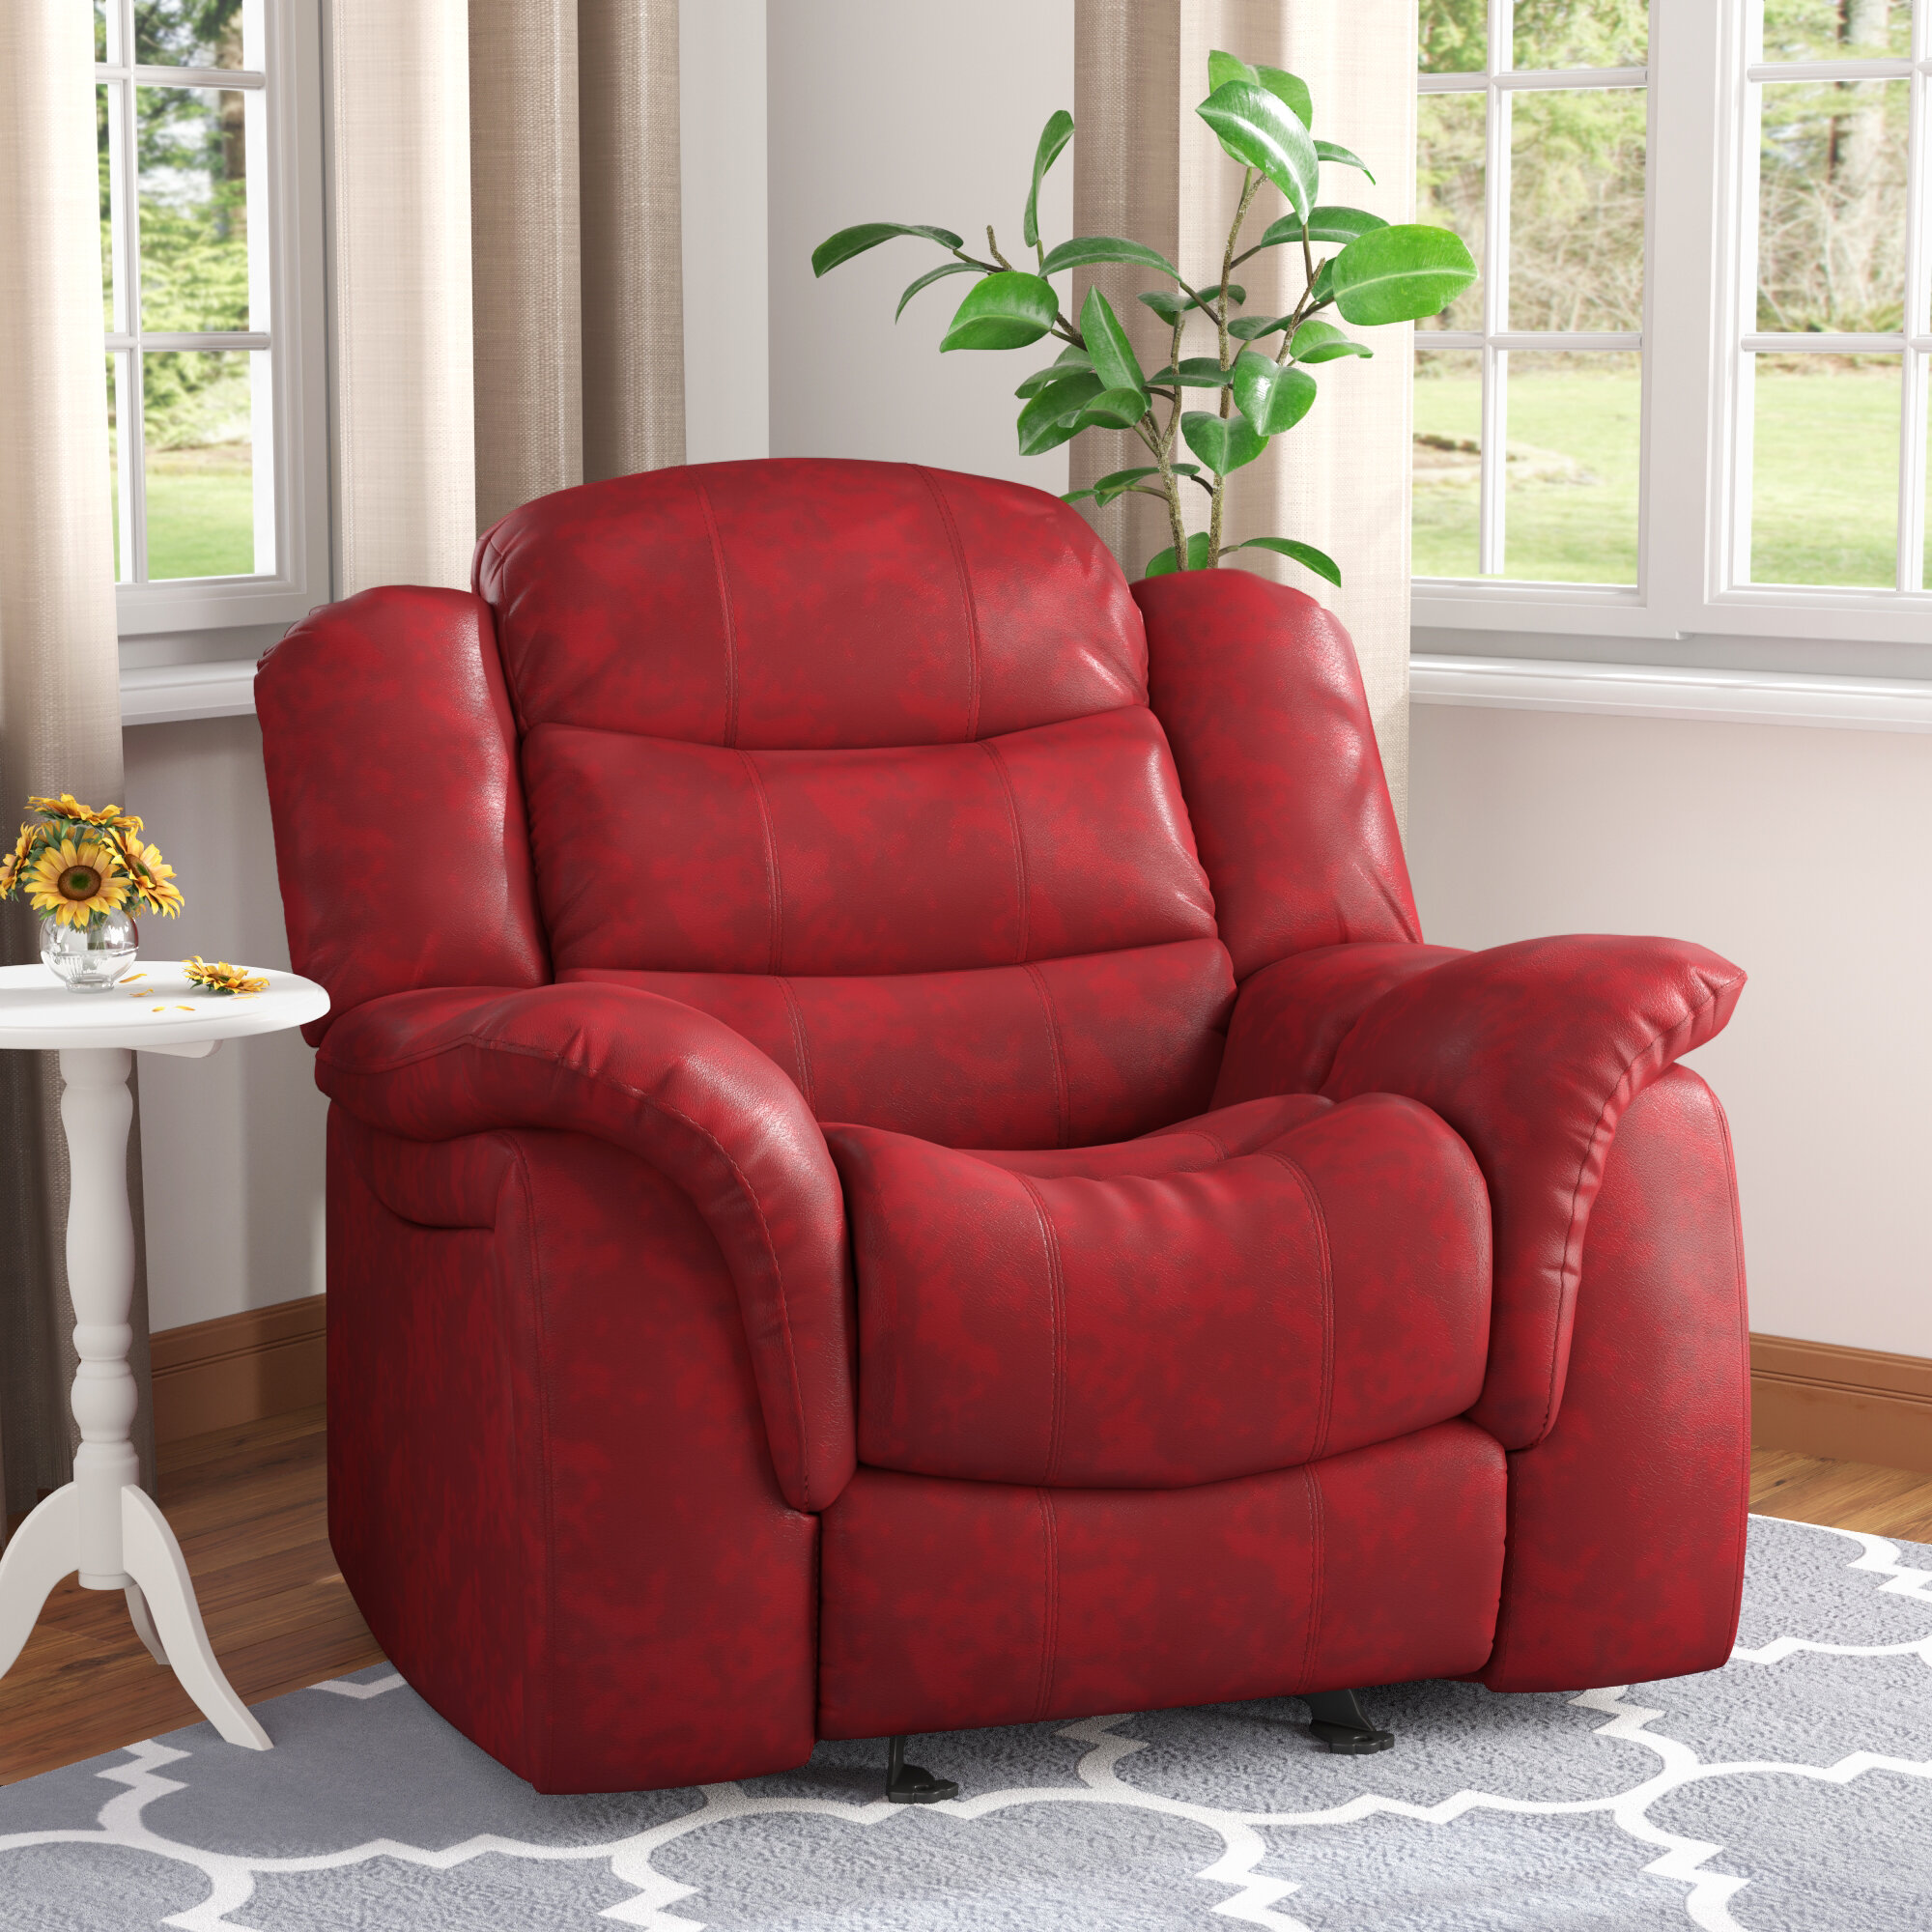 Mager 42.52” Wide Faux Leather Manual Glider Club Recliner